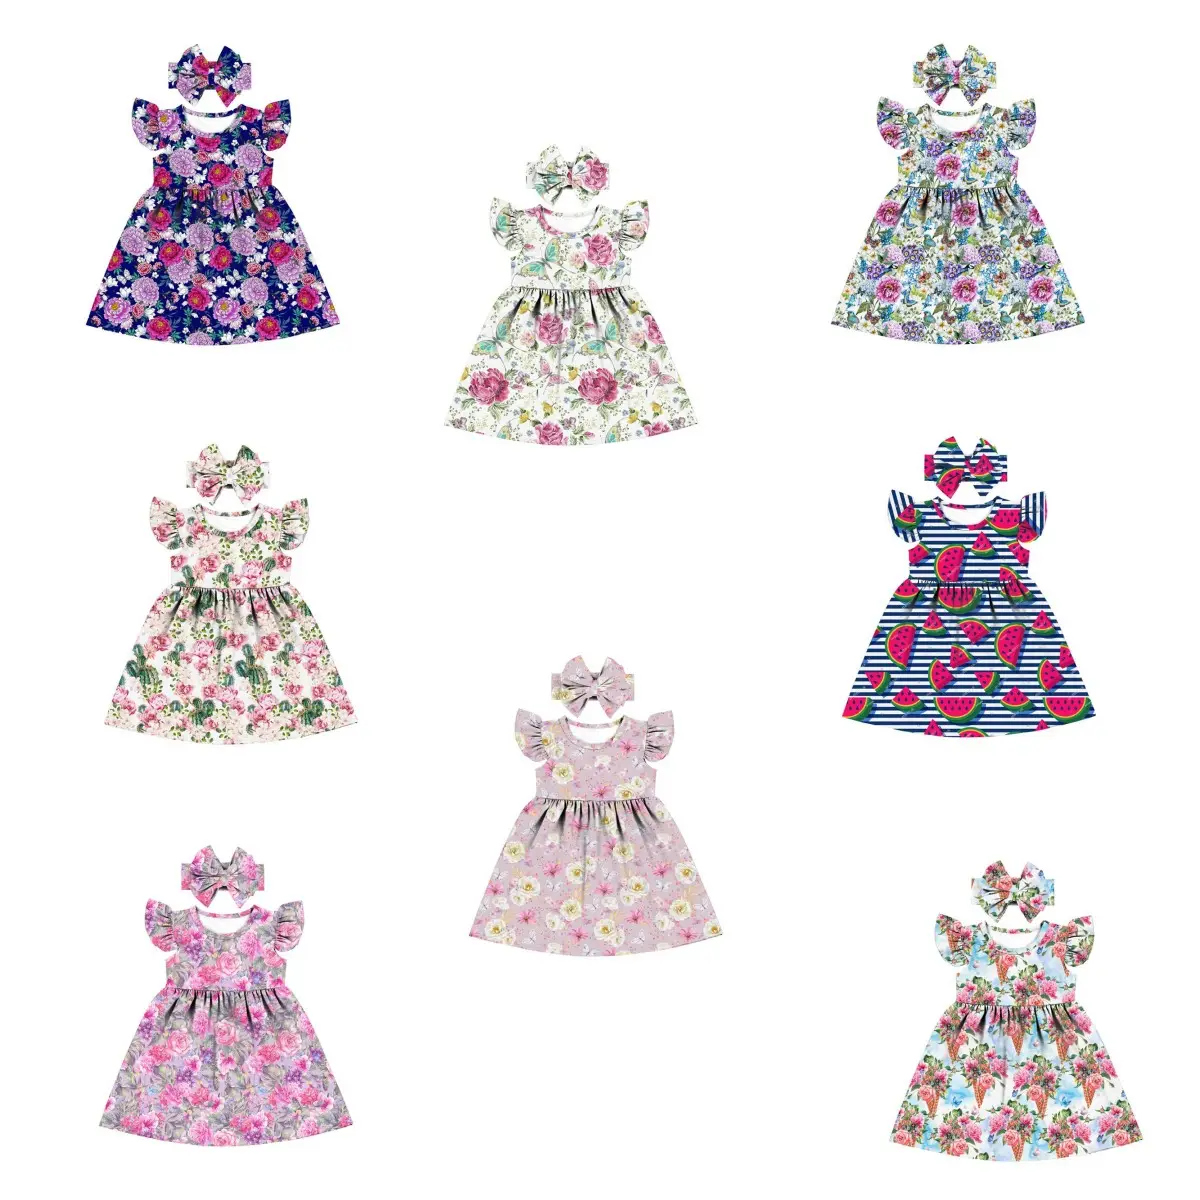 2022 Spring Floral little girls dress with bow Flutter sleeve girl dresses 6 to 14 years Princess formal dresses for girls